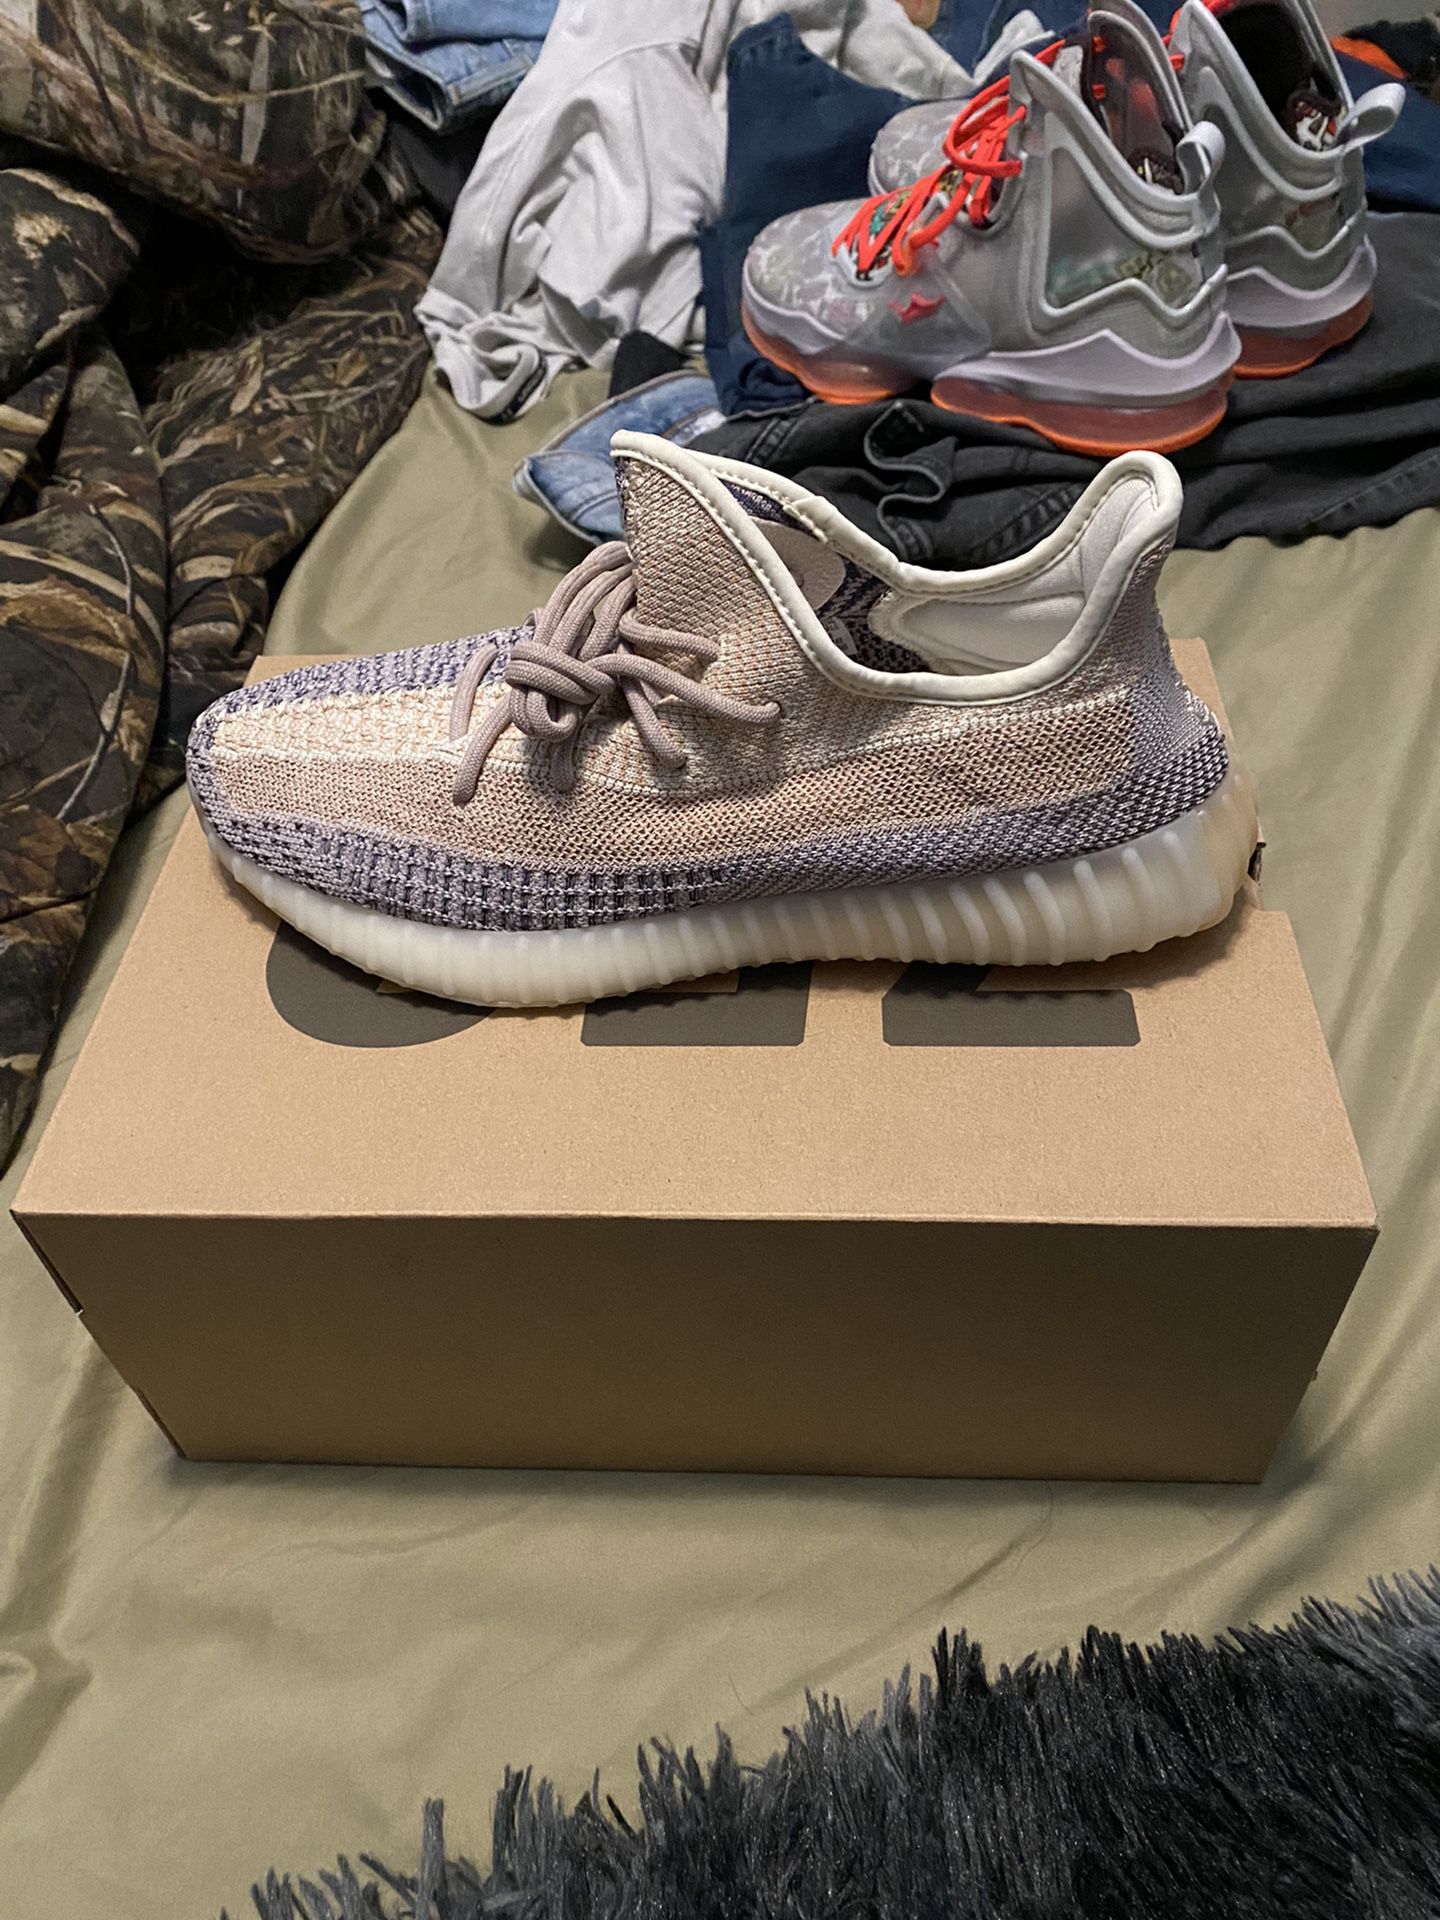 Yeezys 350 V2 Ash Pearl Brand New Size 11 $240